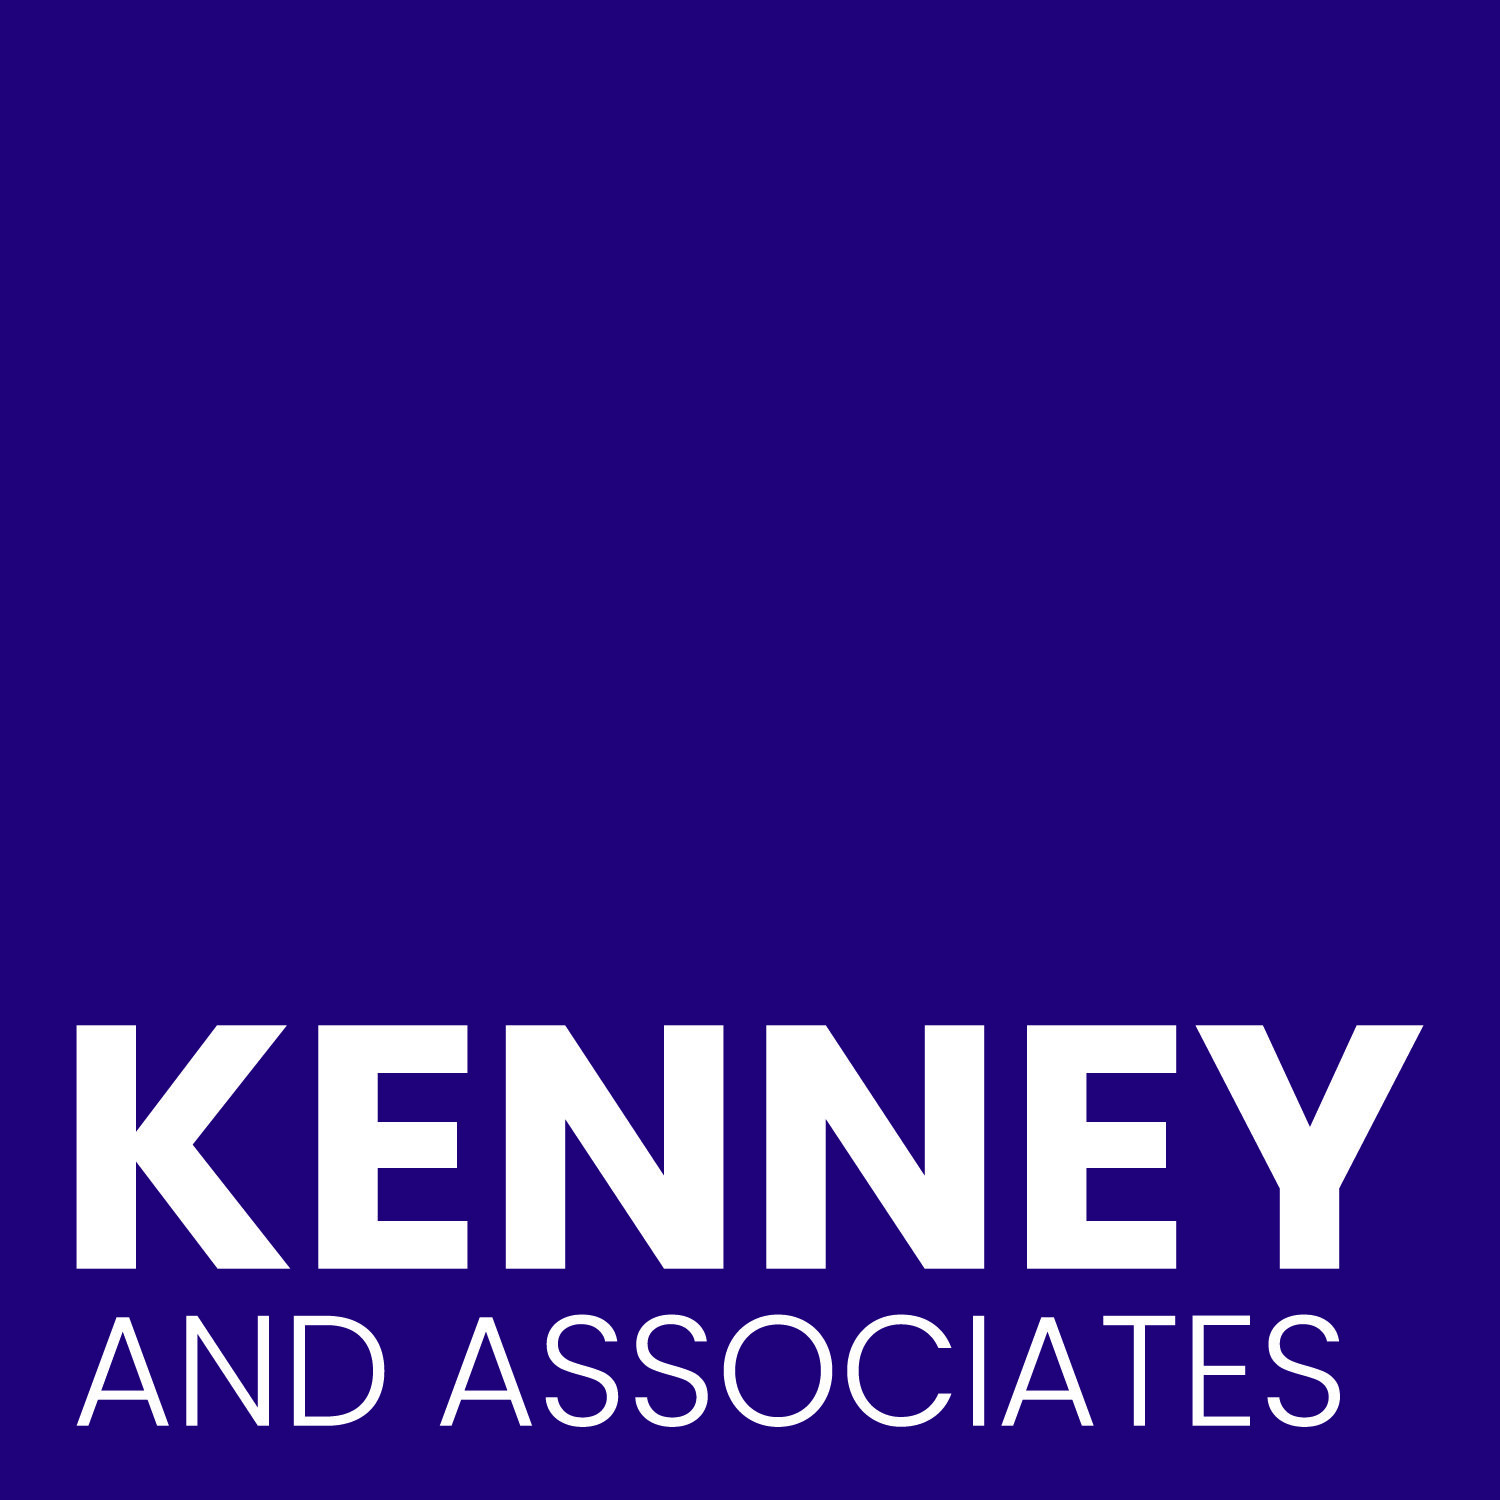 Kenney and Associates